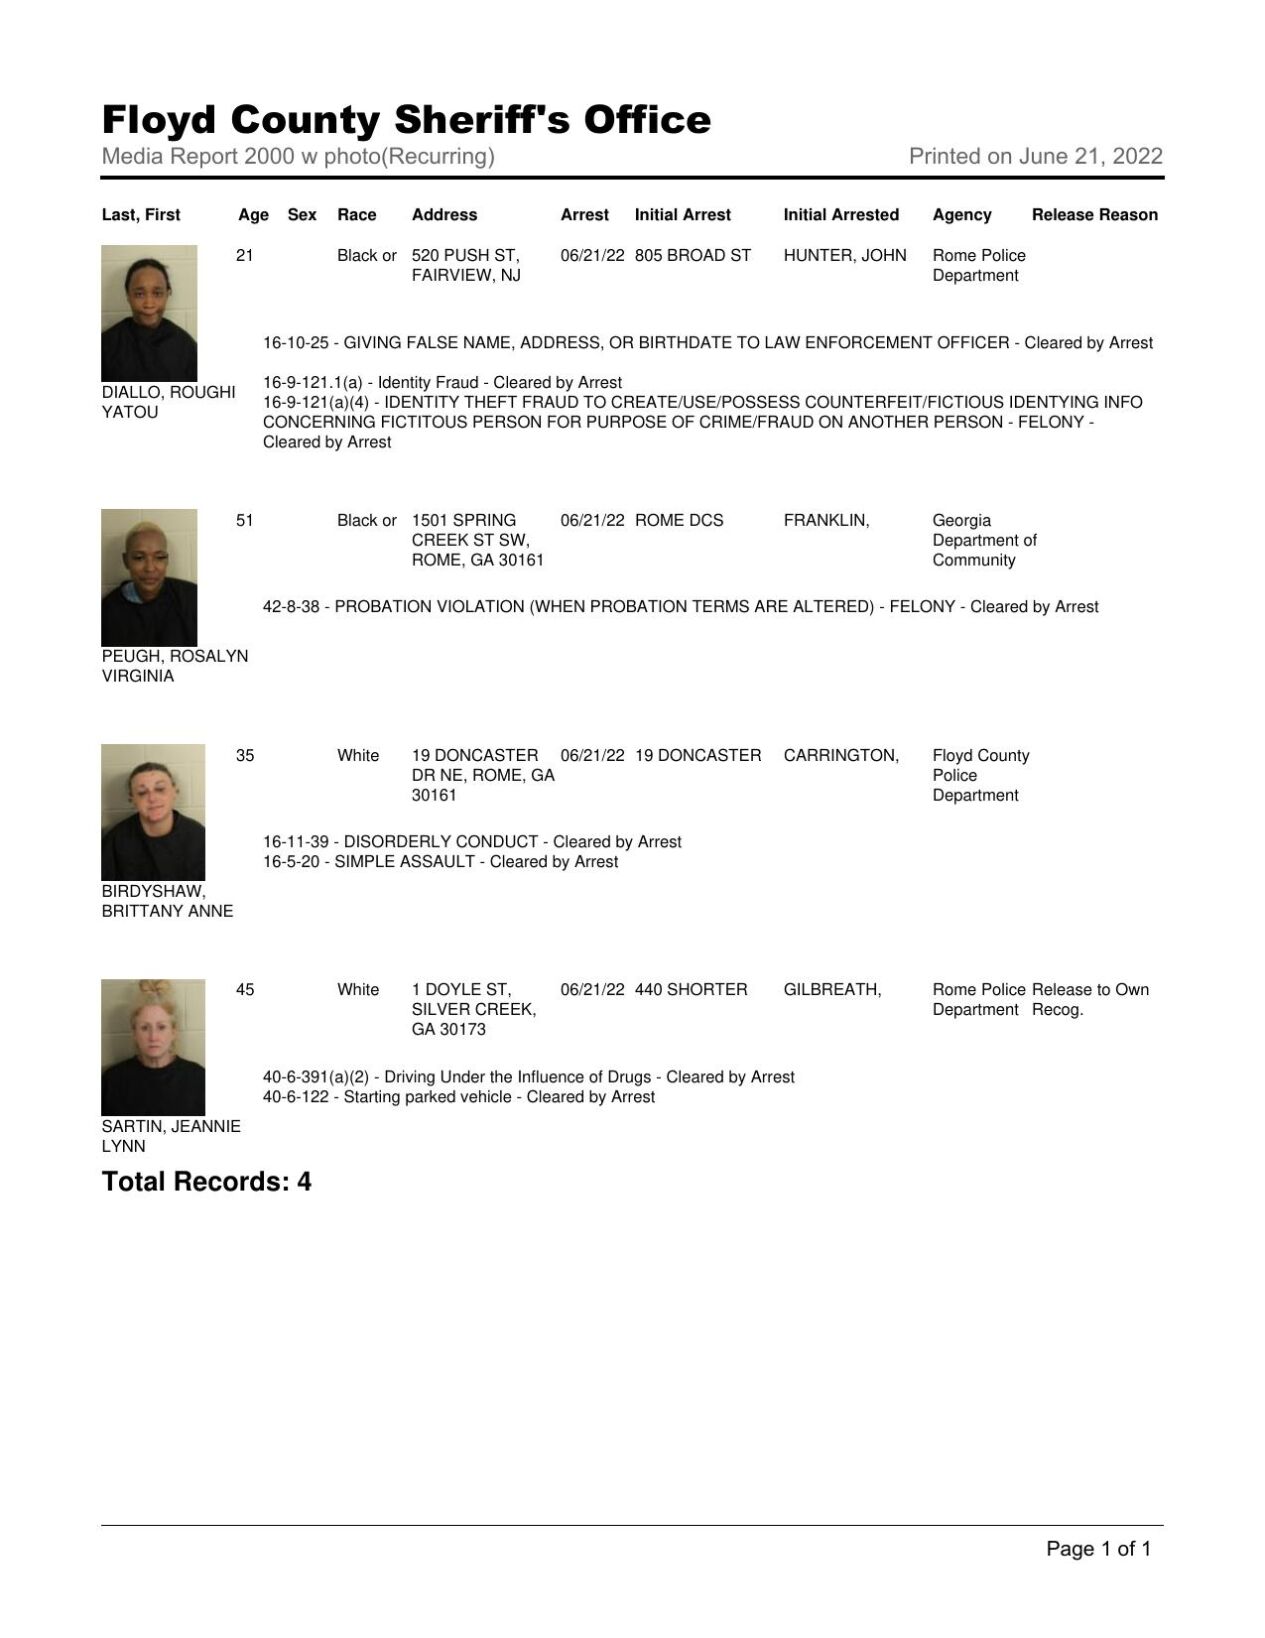 Floyd County Jail report for 8 pm Tuesday, June 21